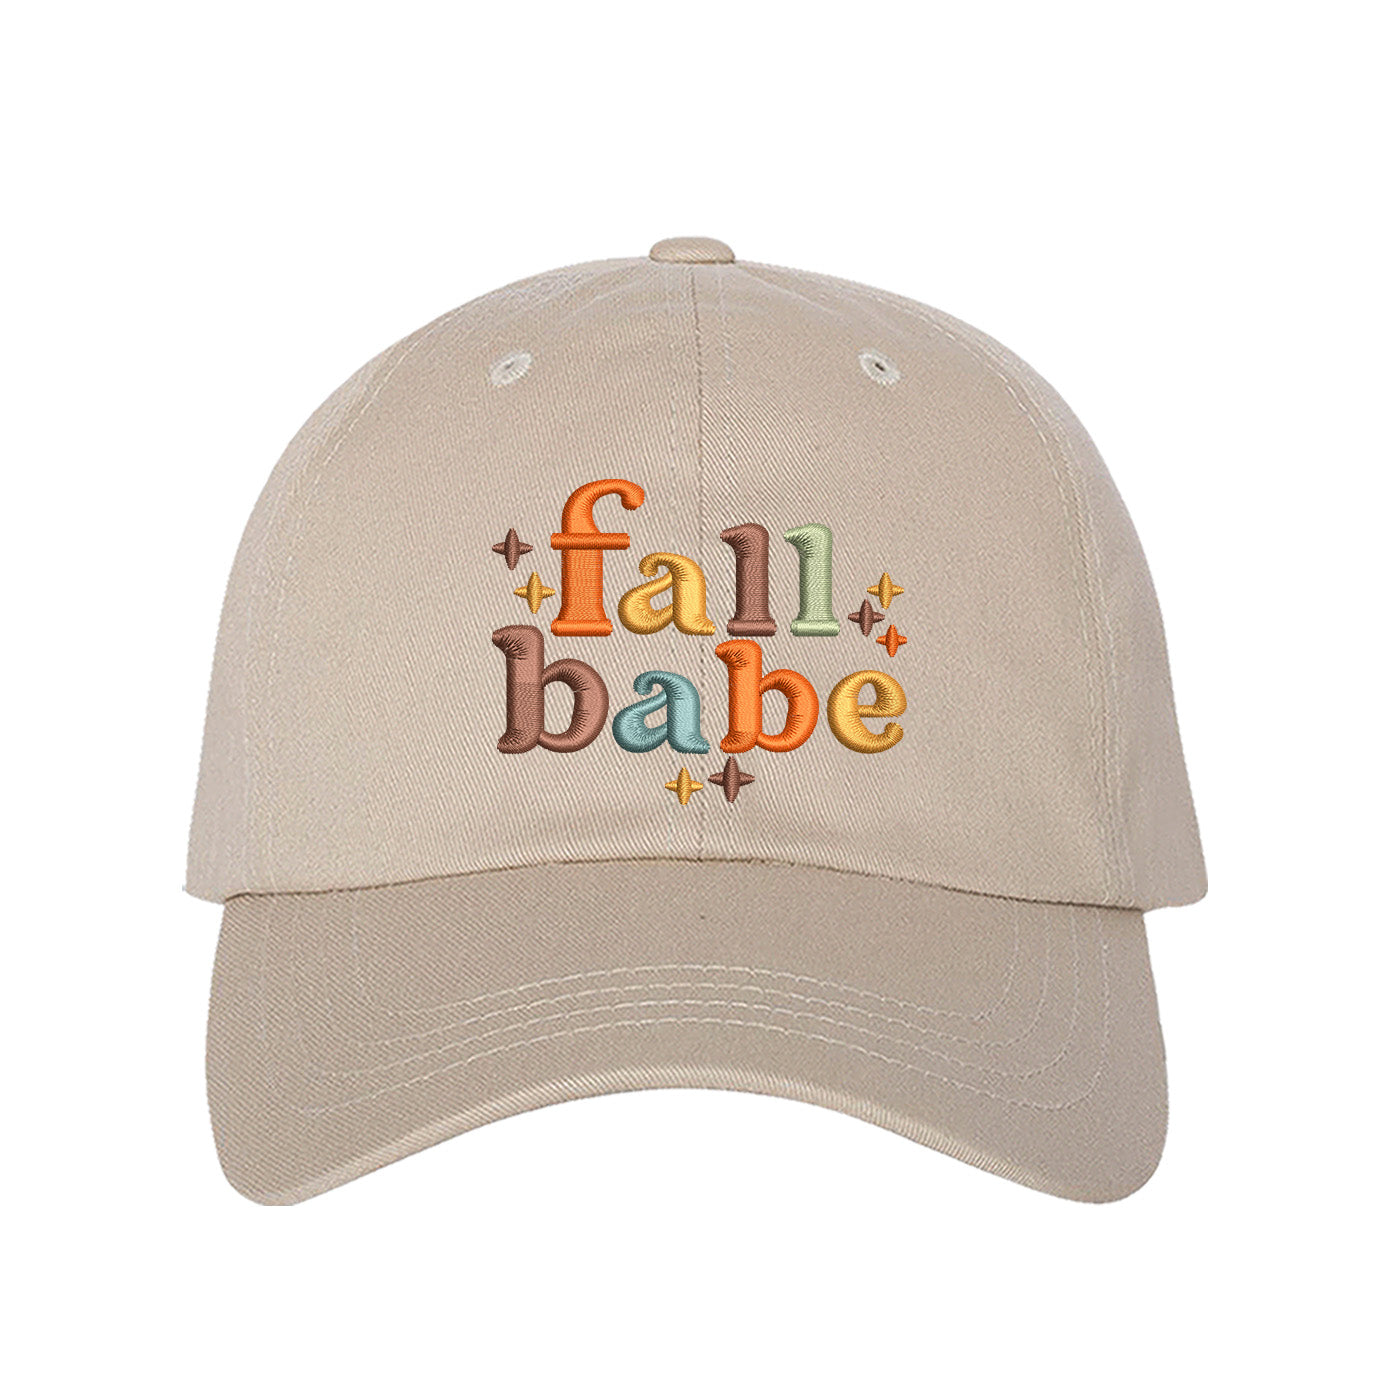 Stone Baseball cap embroidered with Fall Babe - DSY Lifestyle